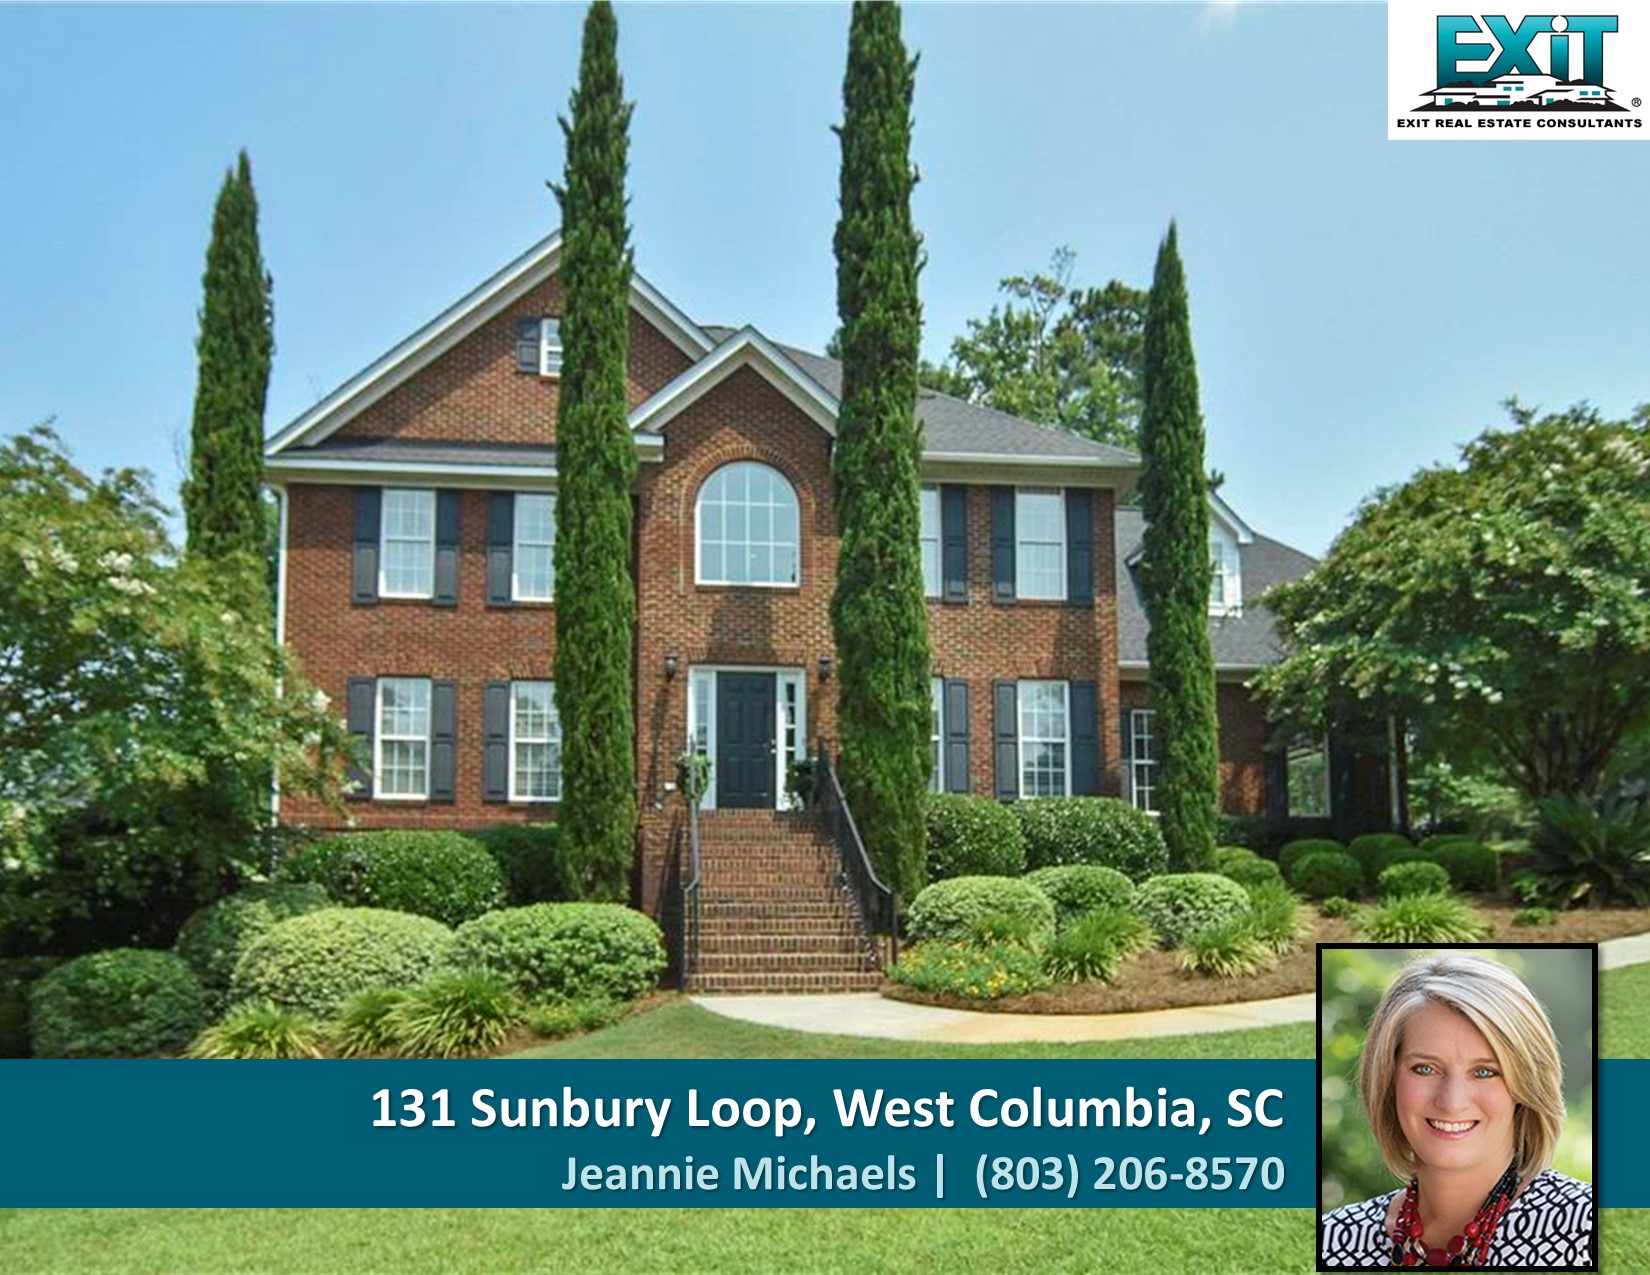 Just listed in Quail Ridge - West Columbia